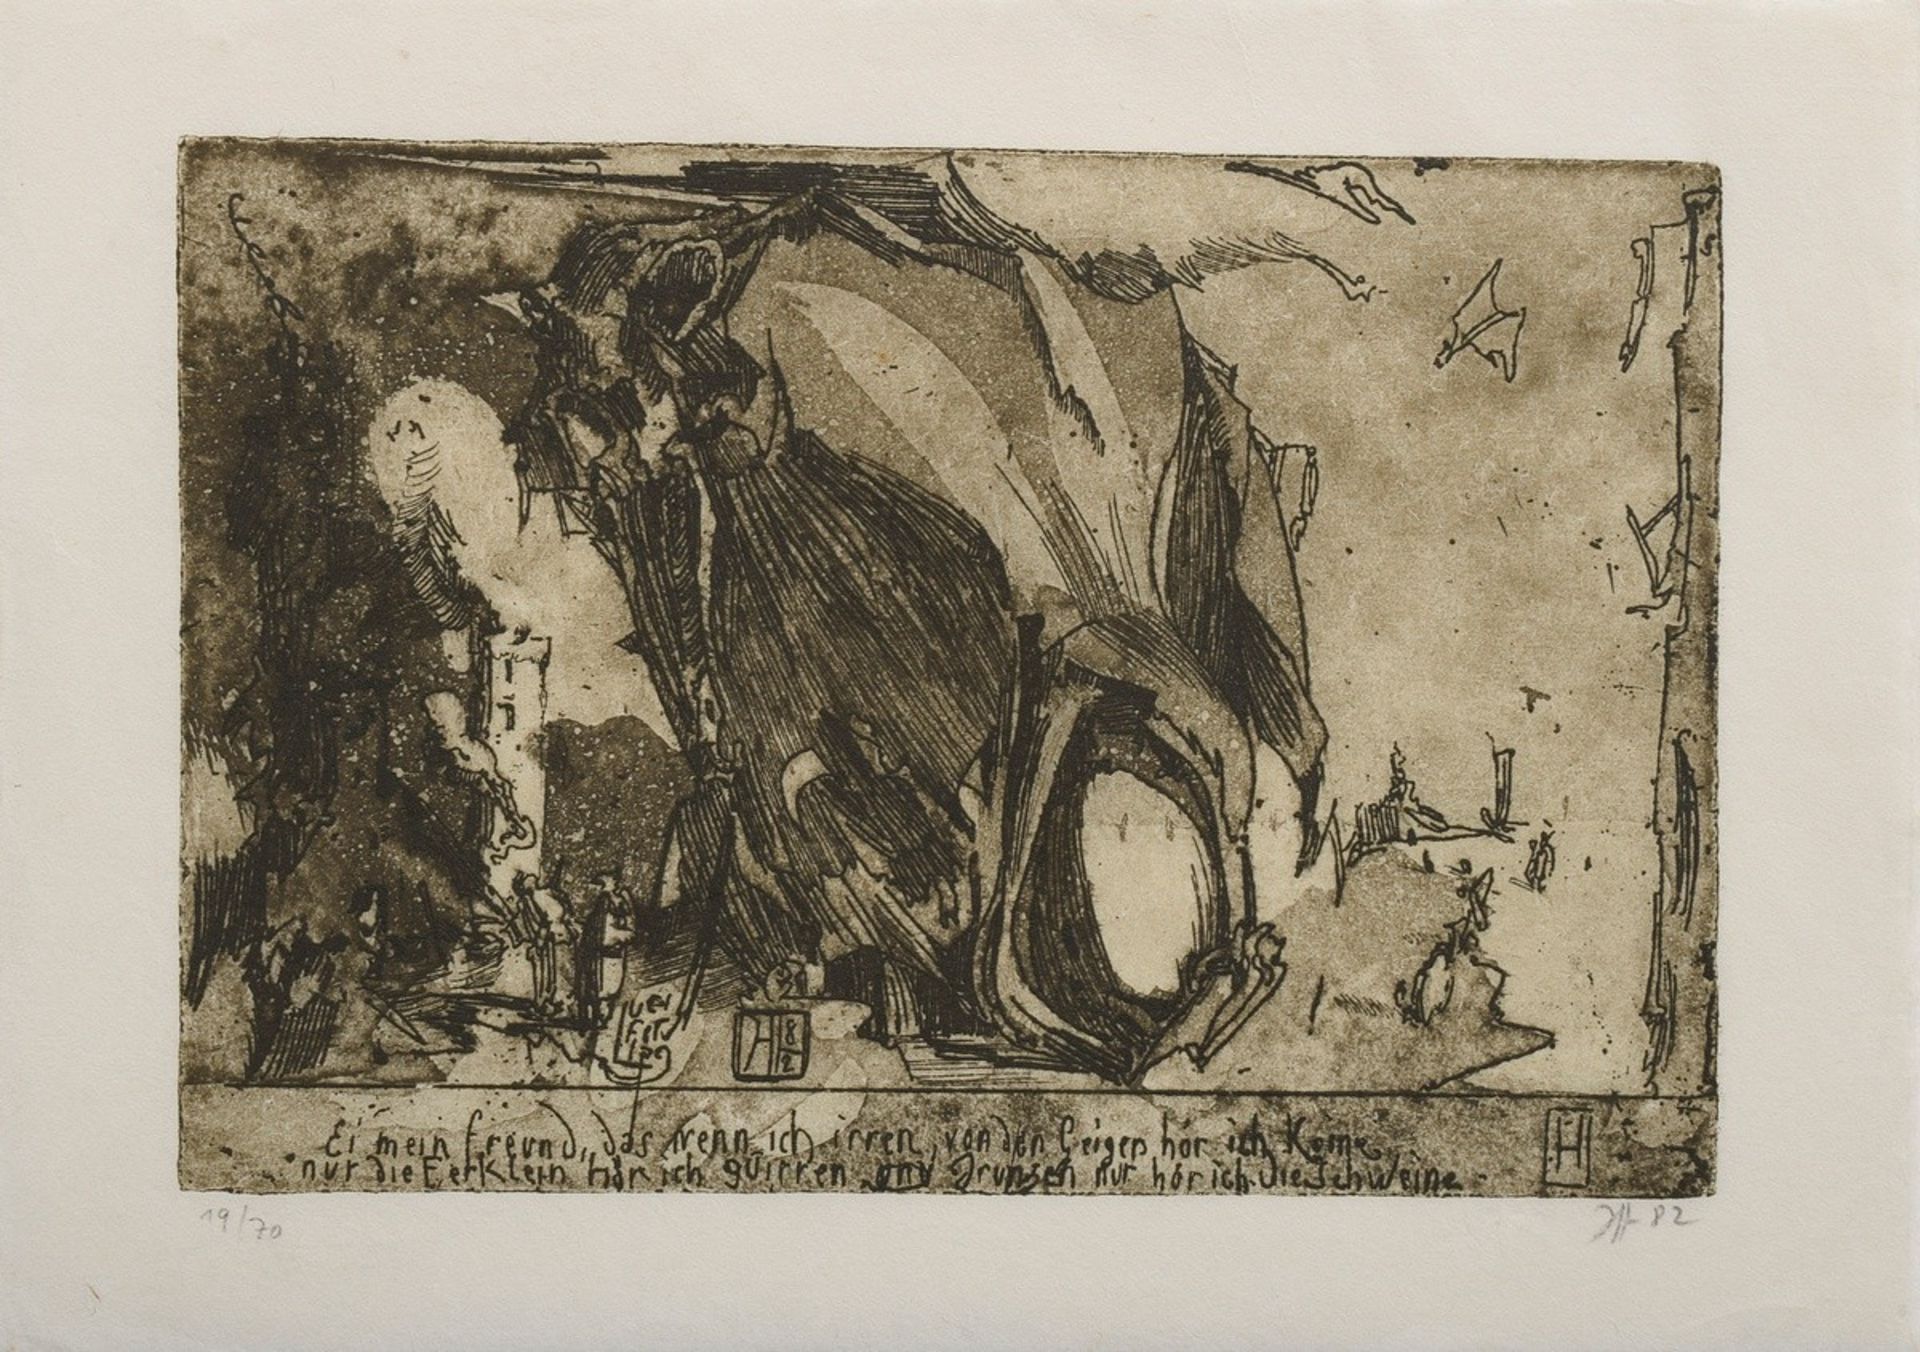 Janssen, Horst (1929-1995) "Egg my friend..." 1982, etching, 19/70, monogr./dat. on plate, and num.